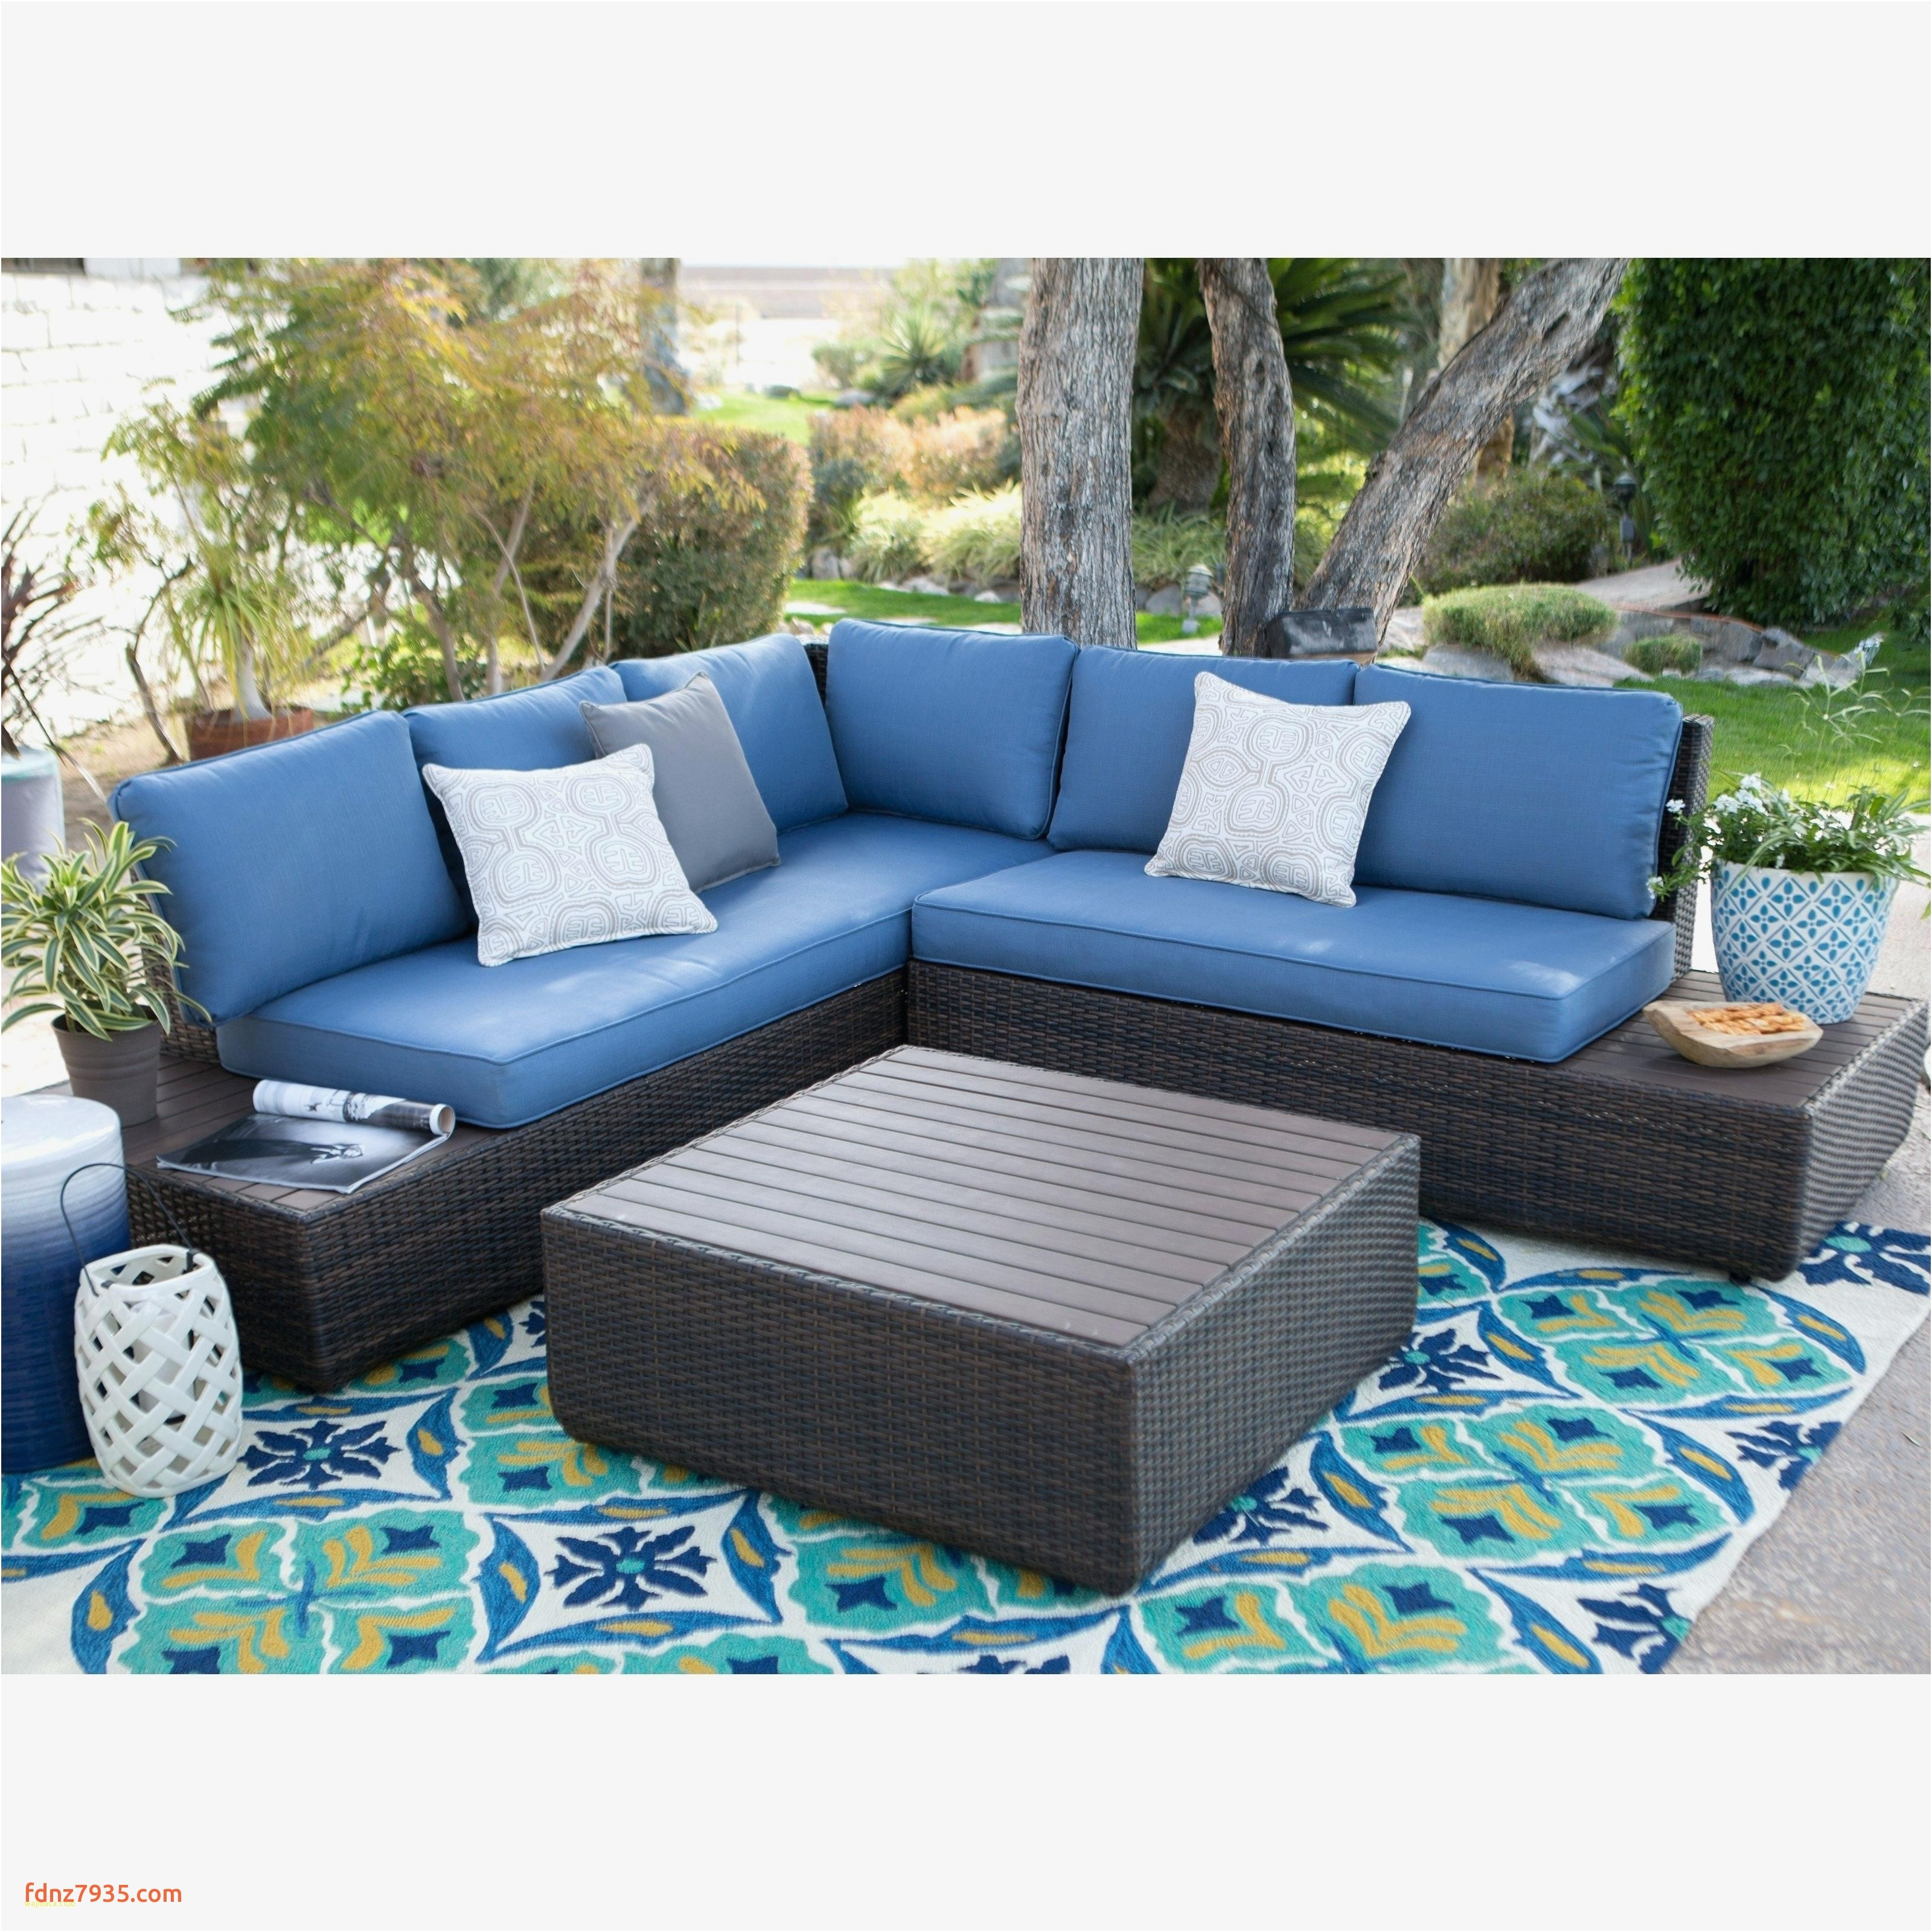 big lot patio furniture unique sales outdoor furniture awesome wicker outdoor sofa 0d patio